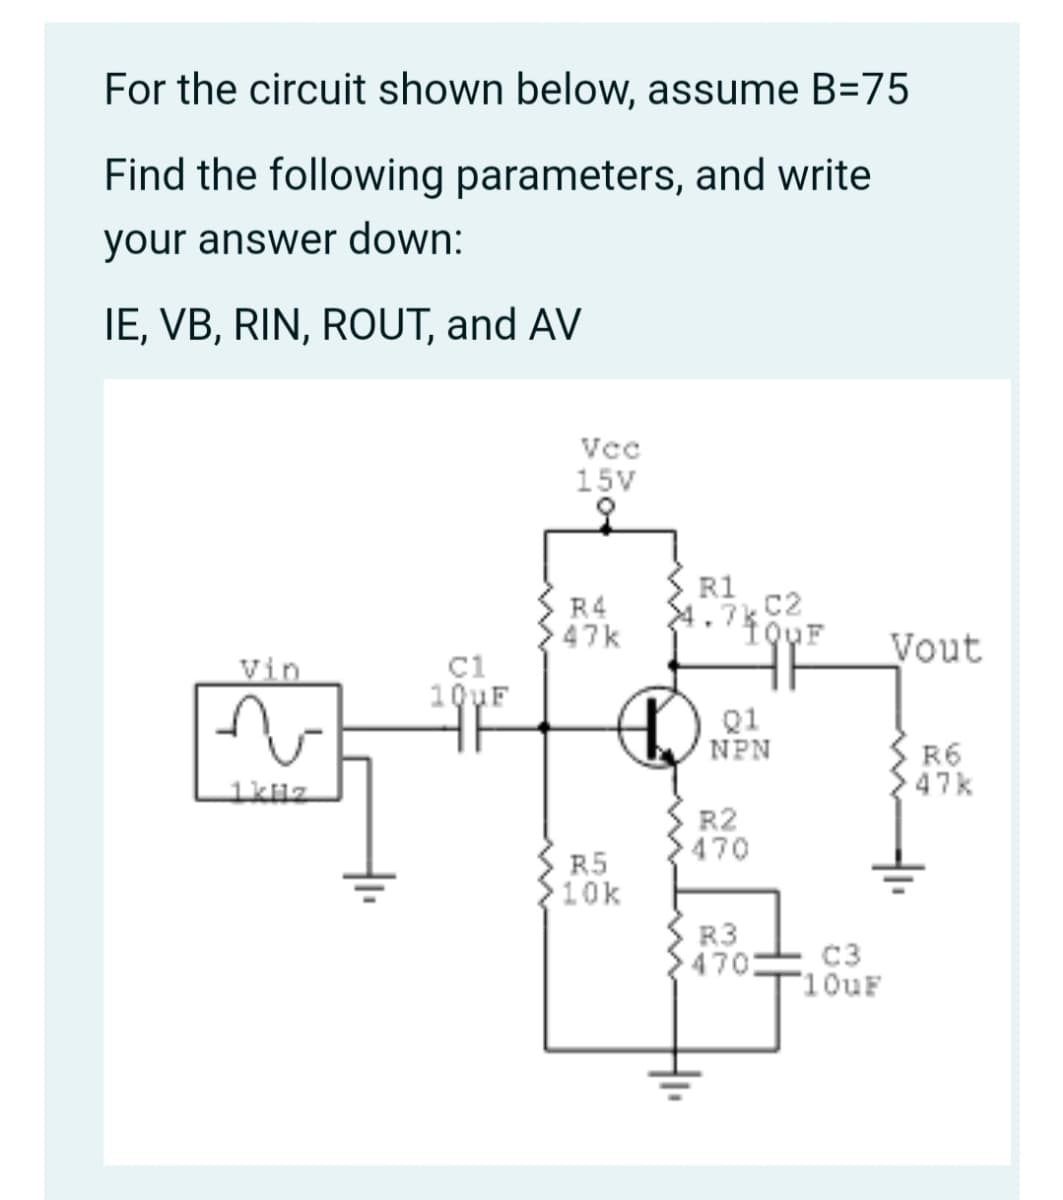 For the circuit shown below, assume B=75
Find the following parameters, and write
your answer down:
IE, VB, RIN, ROUT, and AV
Vcc
15V
R4
47k
R1
4.7k C2
Vout
C1
10yF
Vin
Q1
NPN
R6
47k
1kuz
R2
470
R5
10k
R3
470
C3
10UF
